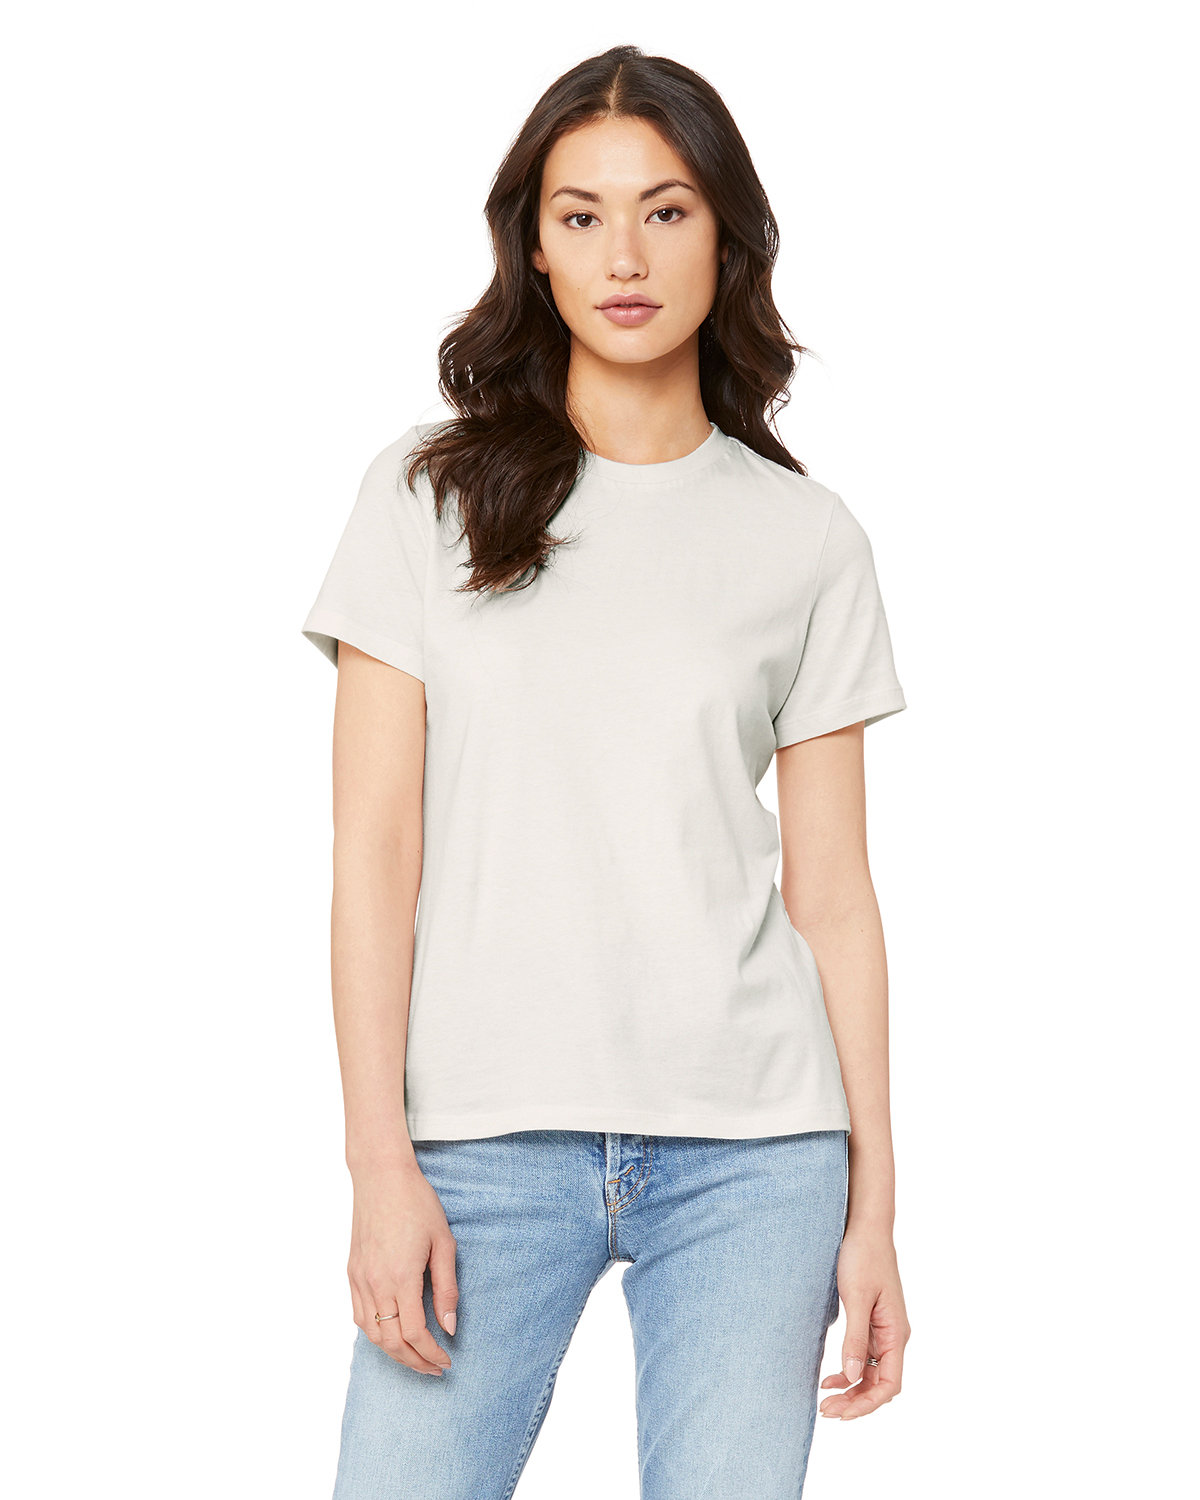 Bella + Canvas Ladies' Relaxed Jersey Short-Sleeve T-Shirt VINTAGE WHITE 